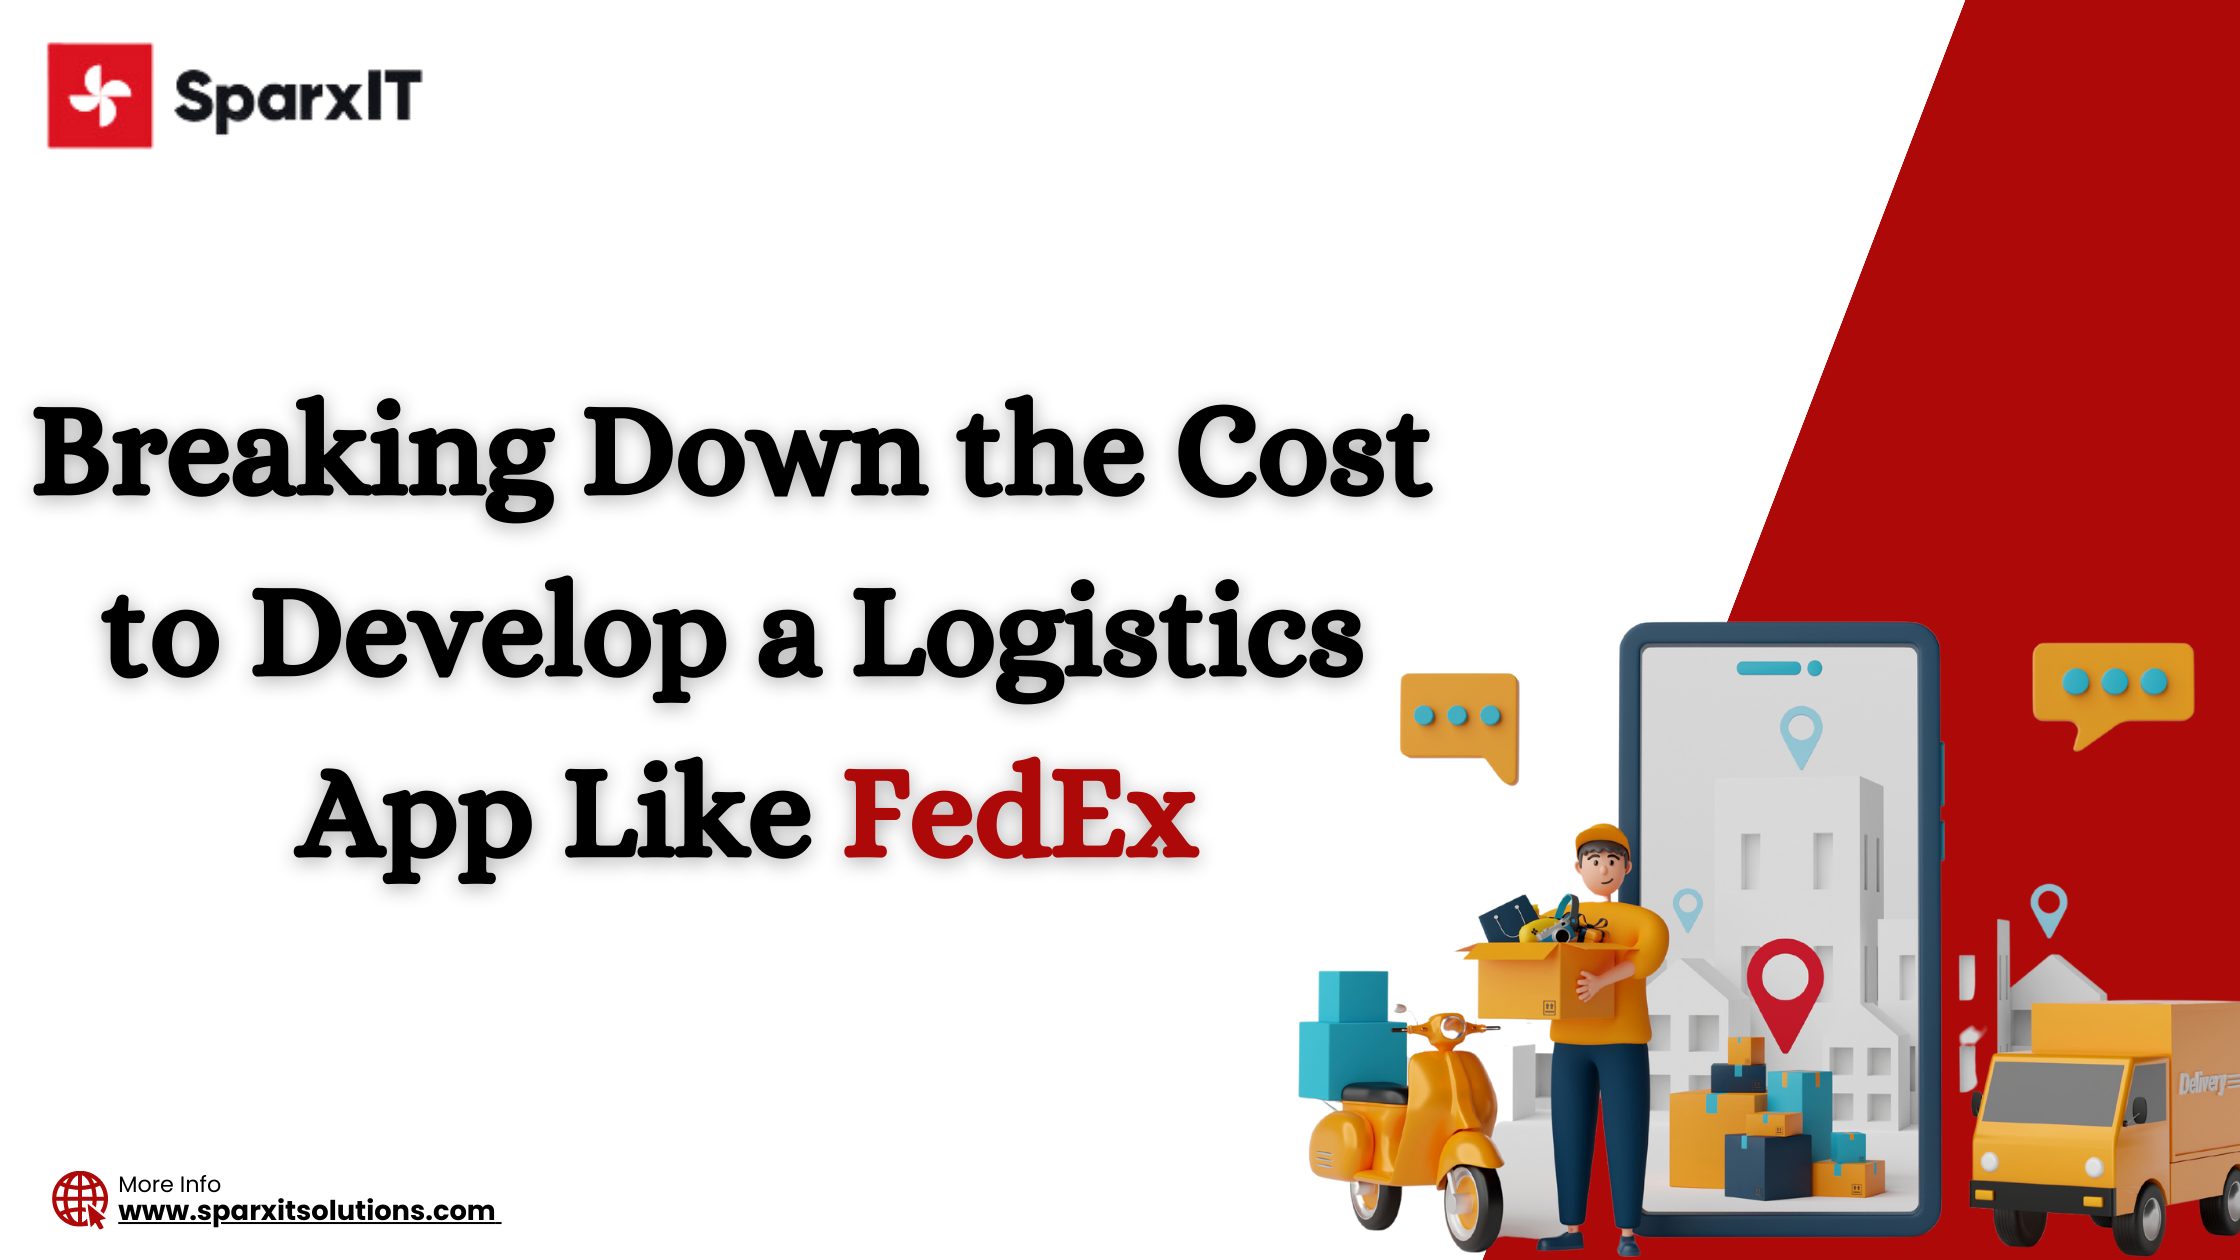 Breaking Down the Cost to Develop a Logistics App Like FedEx